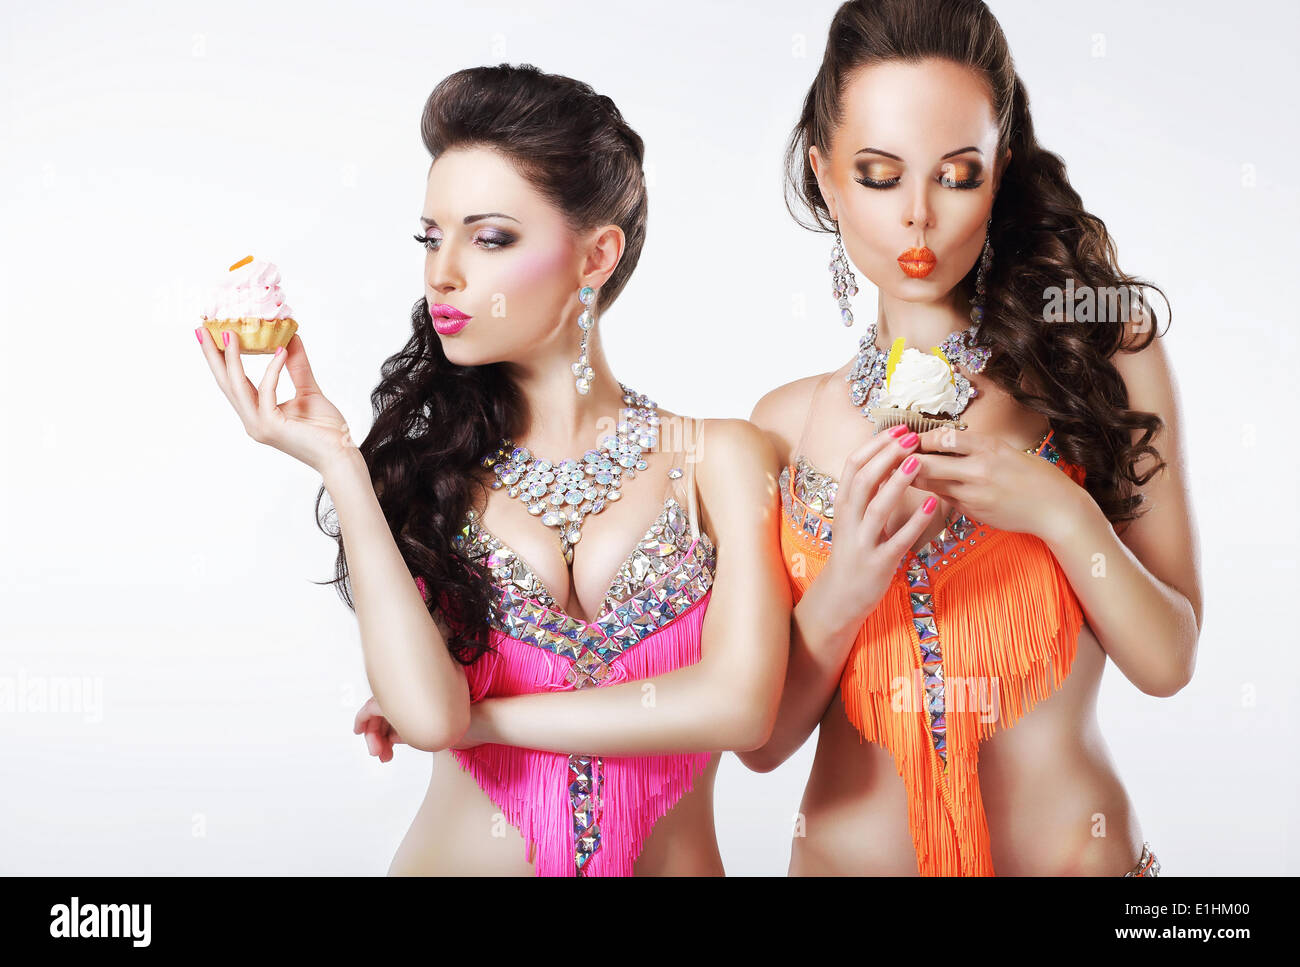 Foretaste. Two Women holding Appetizing Cupcakes with Whipped Cream Stock Photo